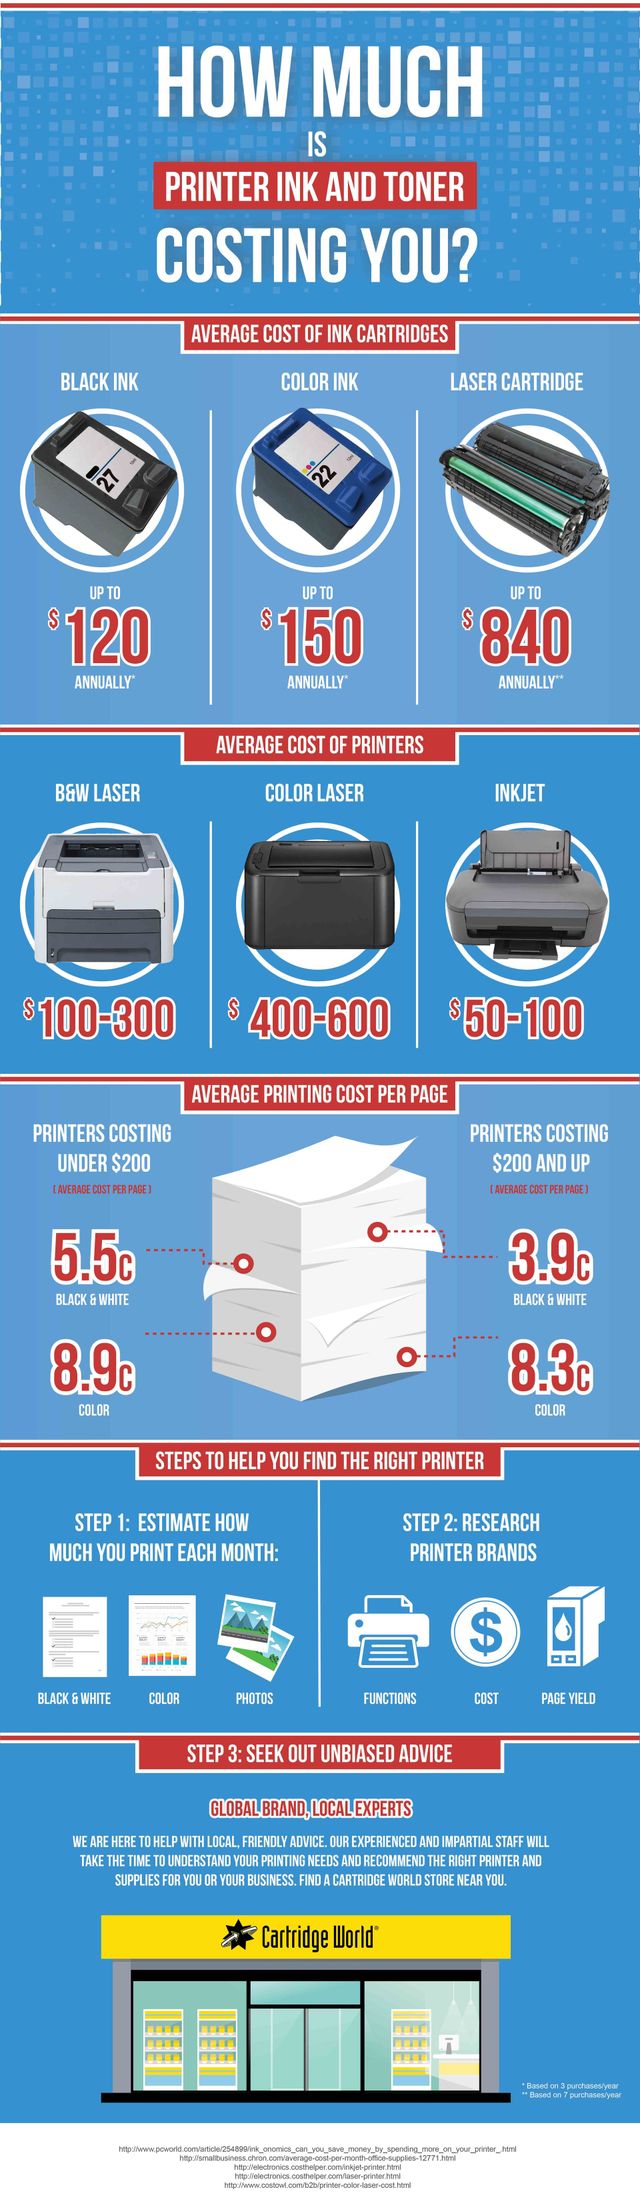 How Much Printer Ink And Toner You?